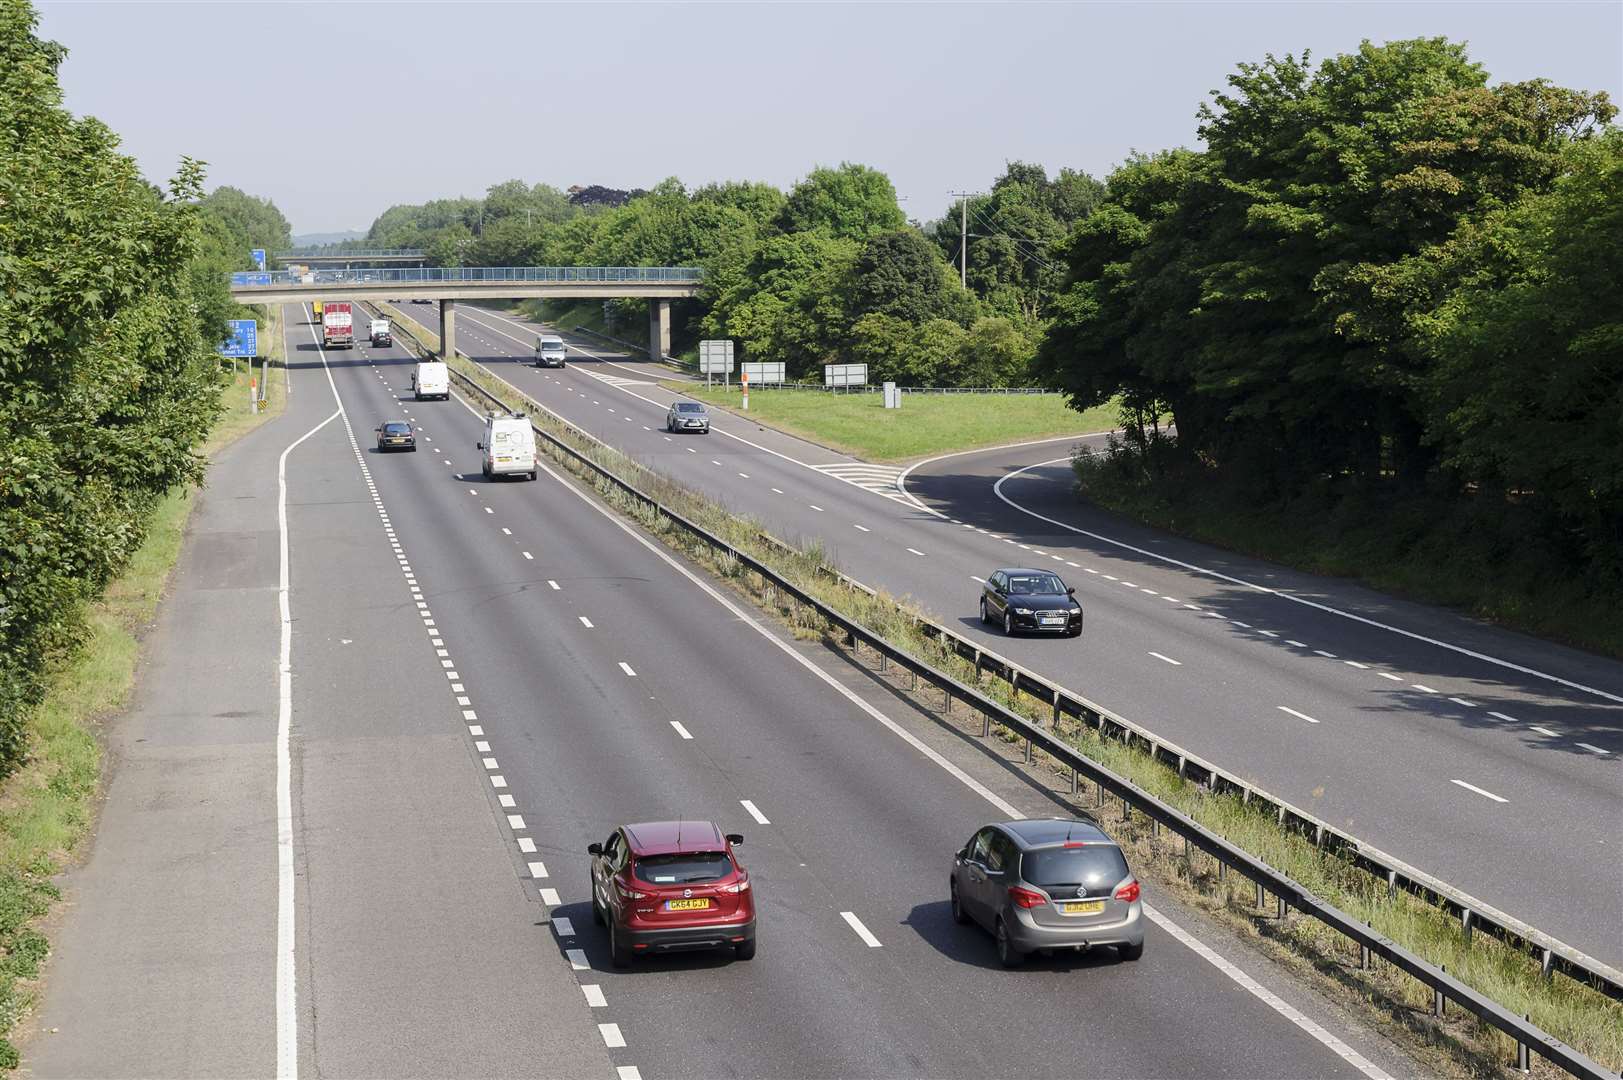 The M2 will be open London-bound, but shut coastbound between Junction 7 and 5